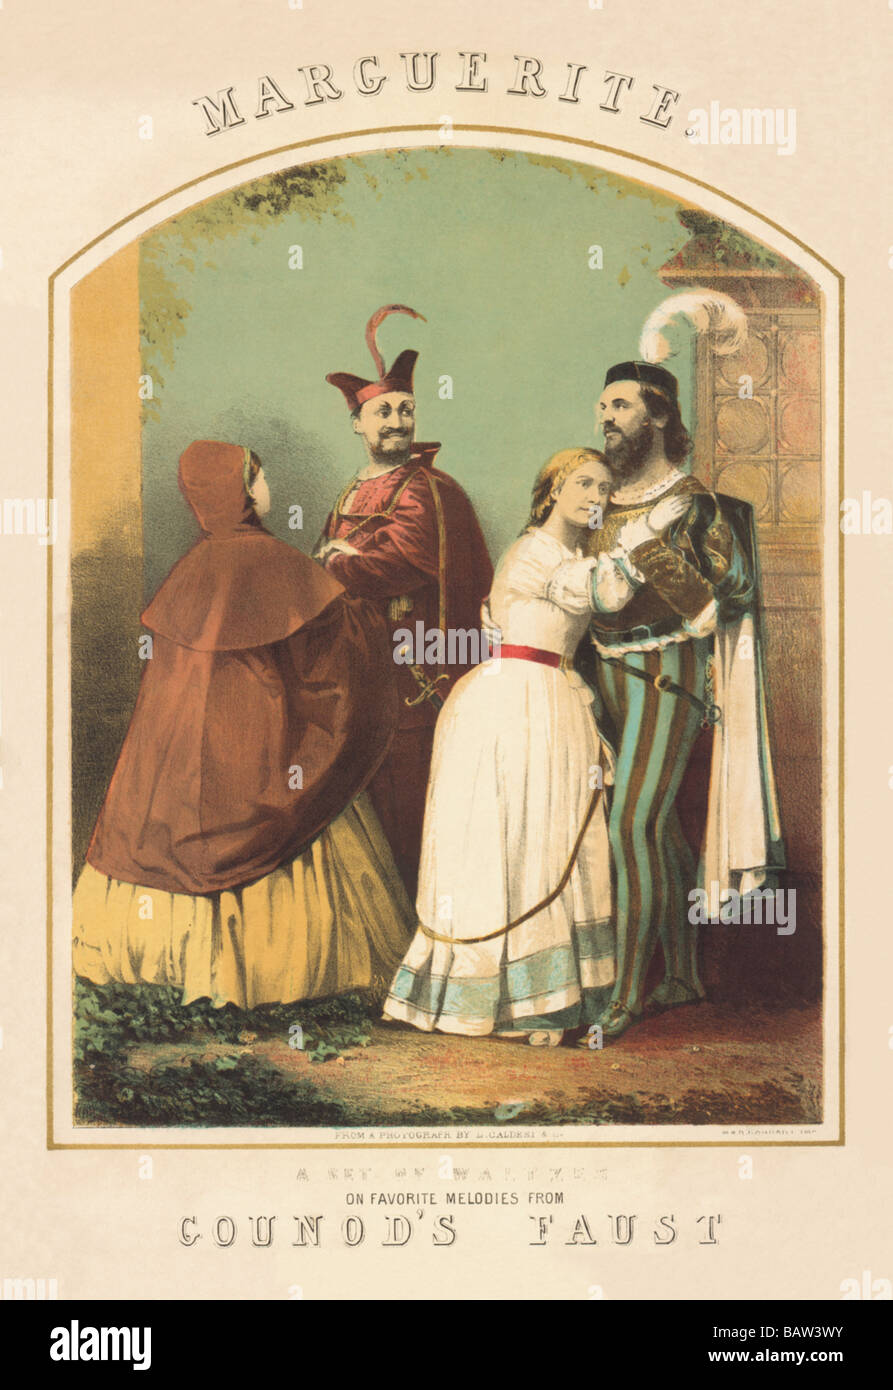 Marguerite: A Favorite Melody from Counod's Faust Stock Photo